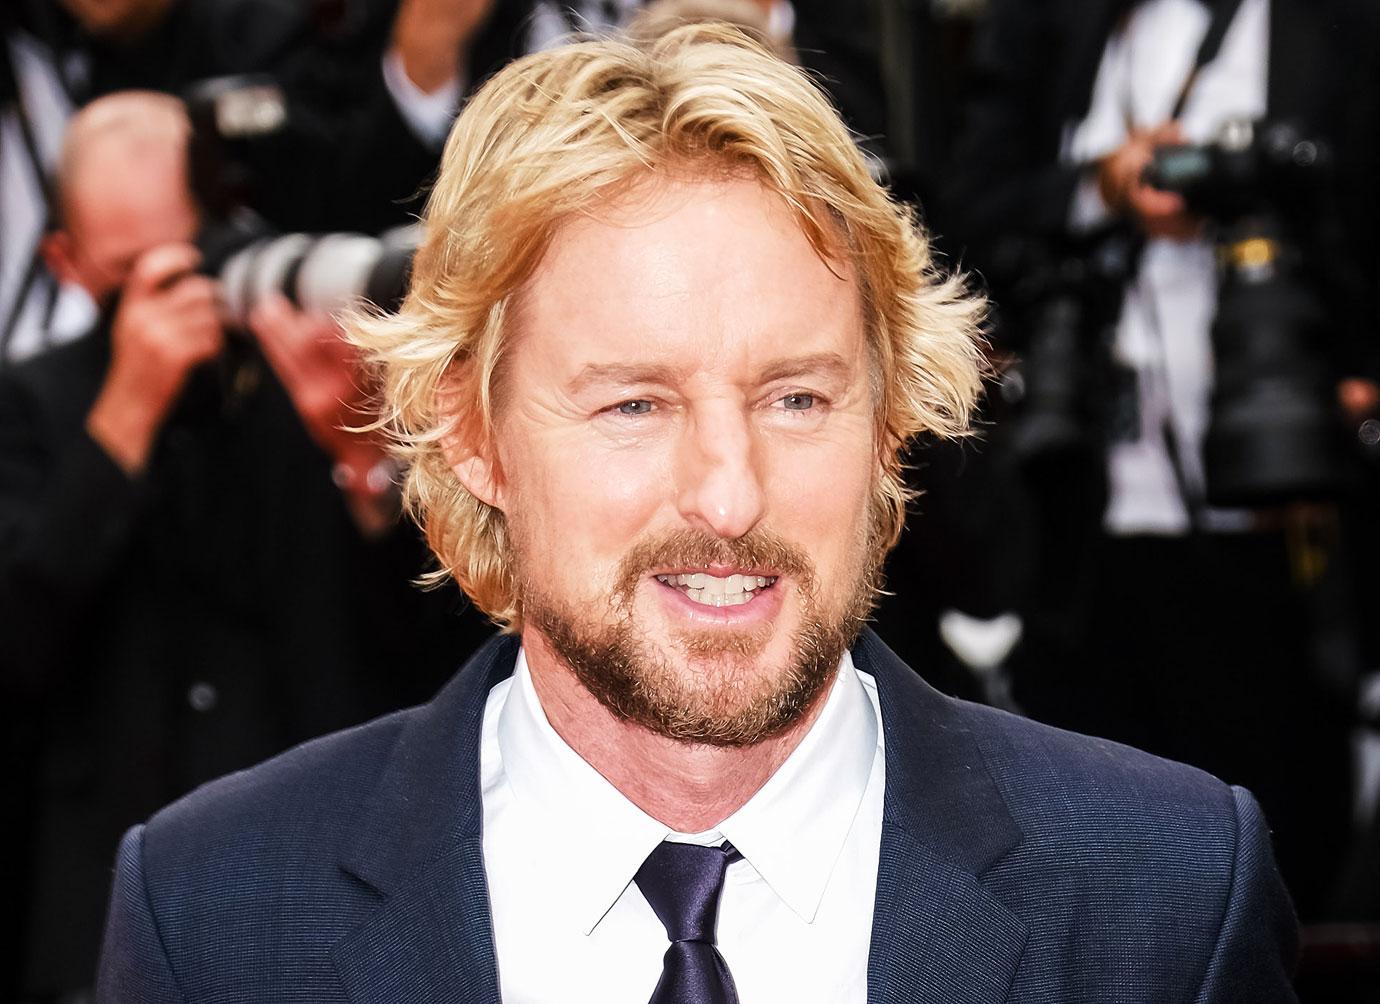 Owen Wilson's Daughter Looks Just Like Him In New Photos